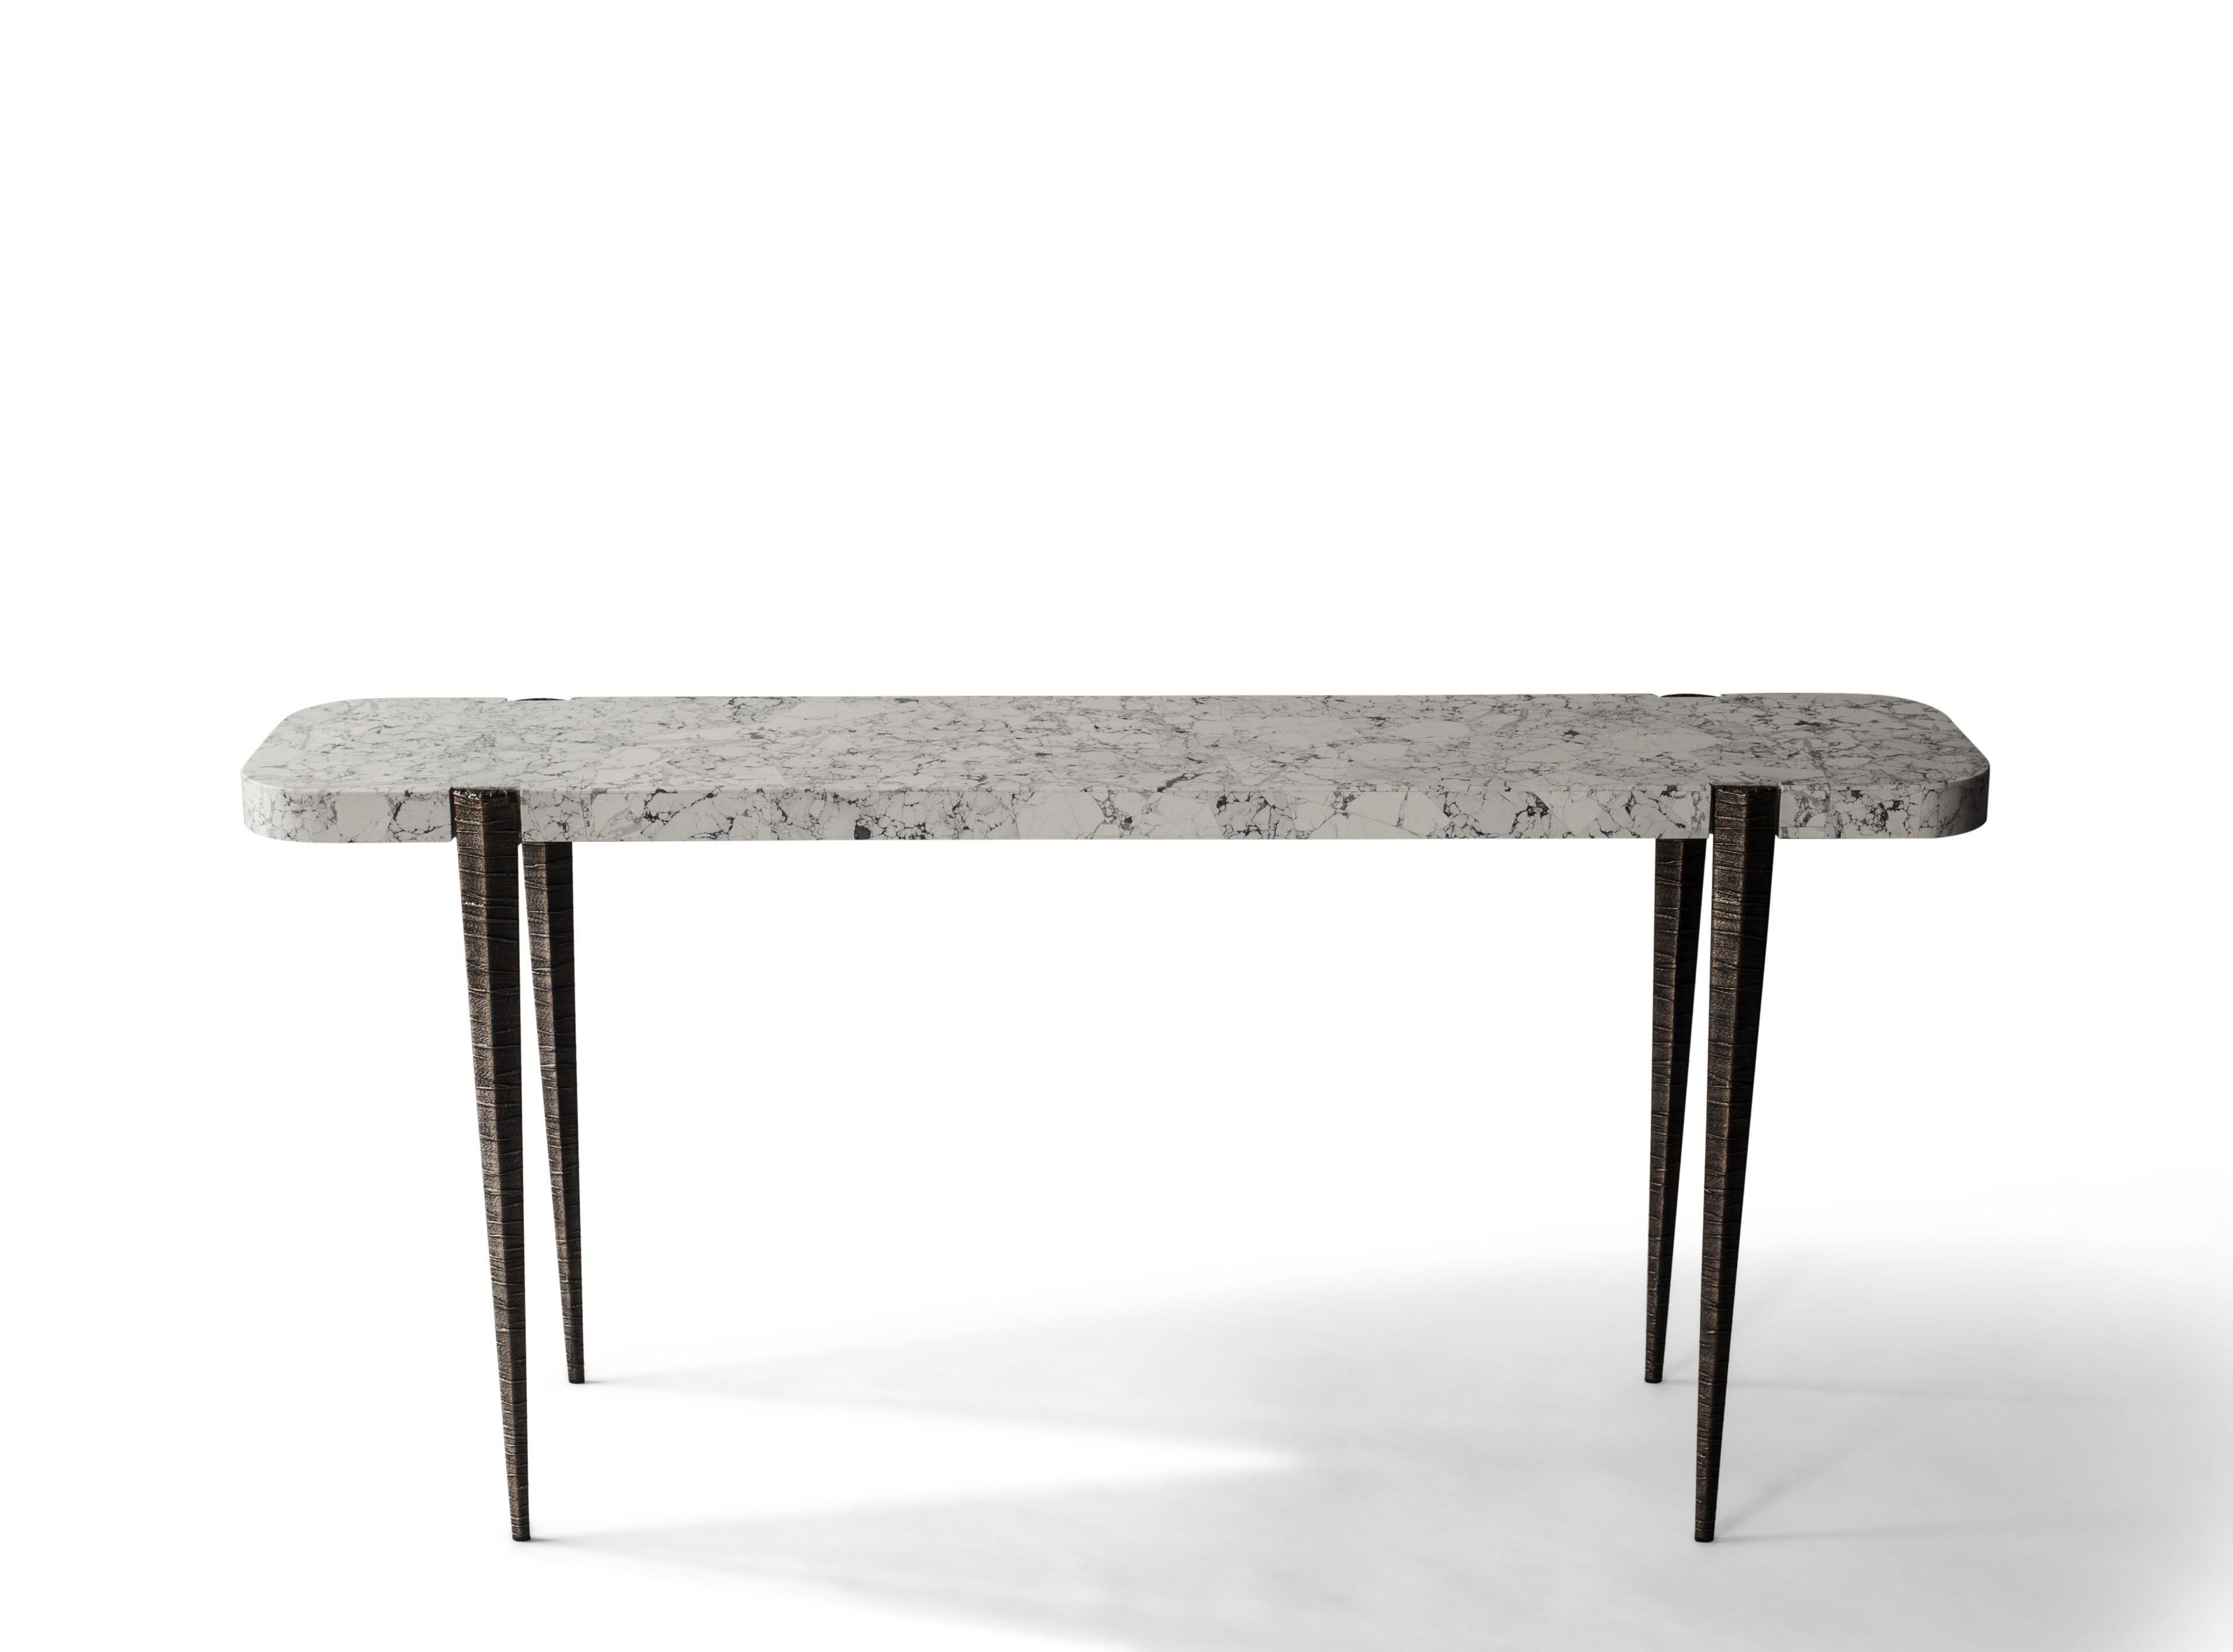 Bind console by DeMuro Das 
Dimensions: W 165 x D 37.6 x H 76 cm
Materials: Howlite - Polished (Random) Tabletop
 Solid Bronze (Antique) legs

DeMuro Das is an international design firm and the aesthetic and cultural coalescence of its